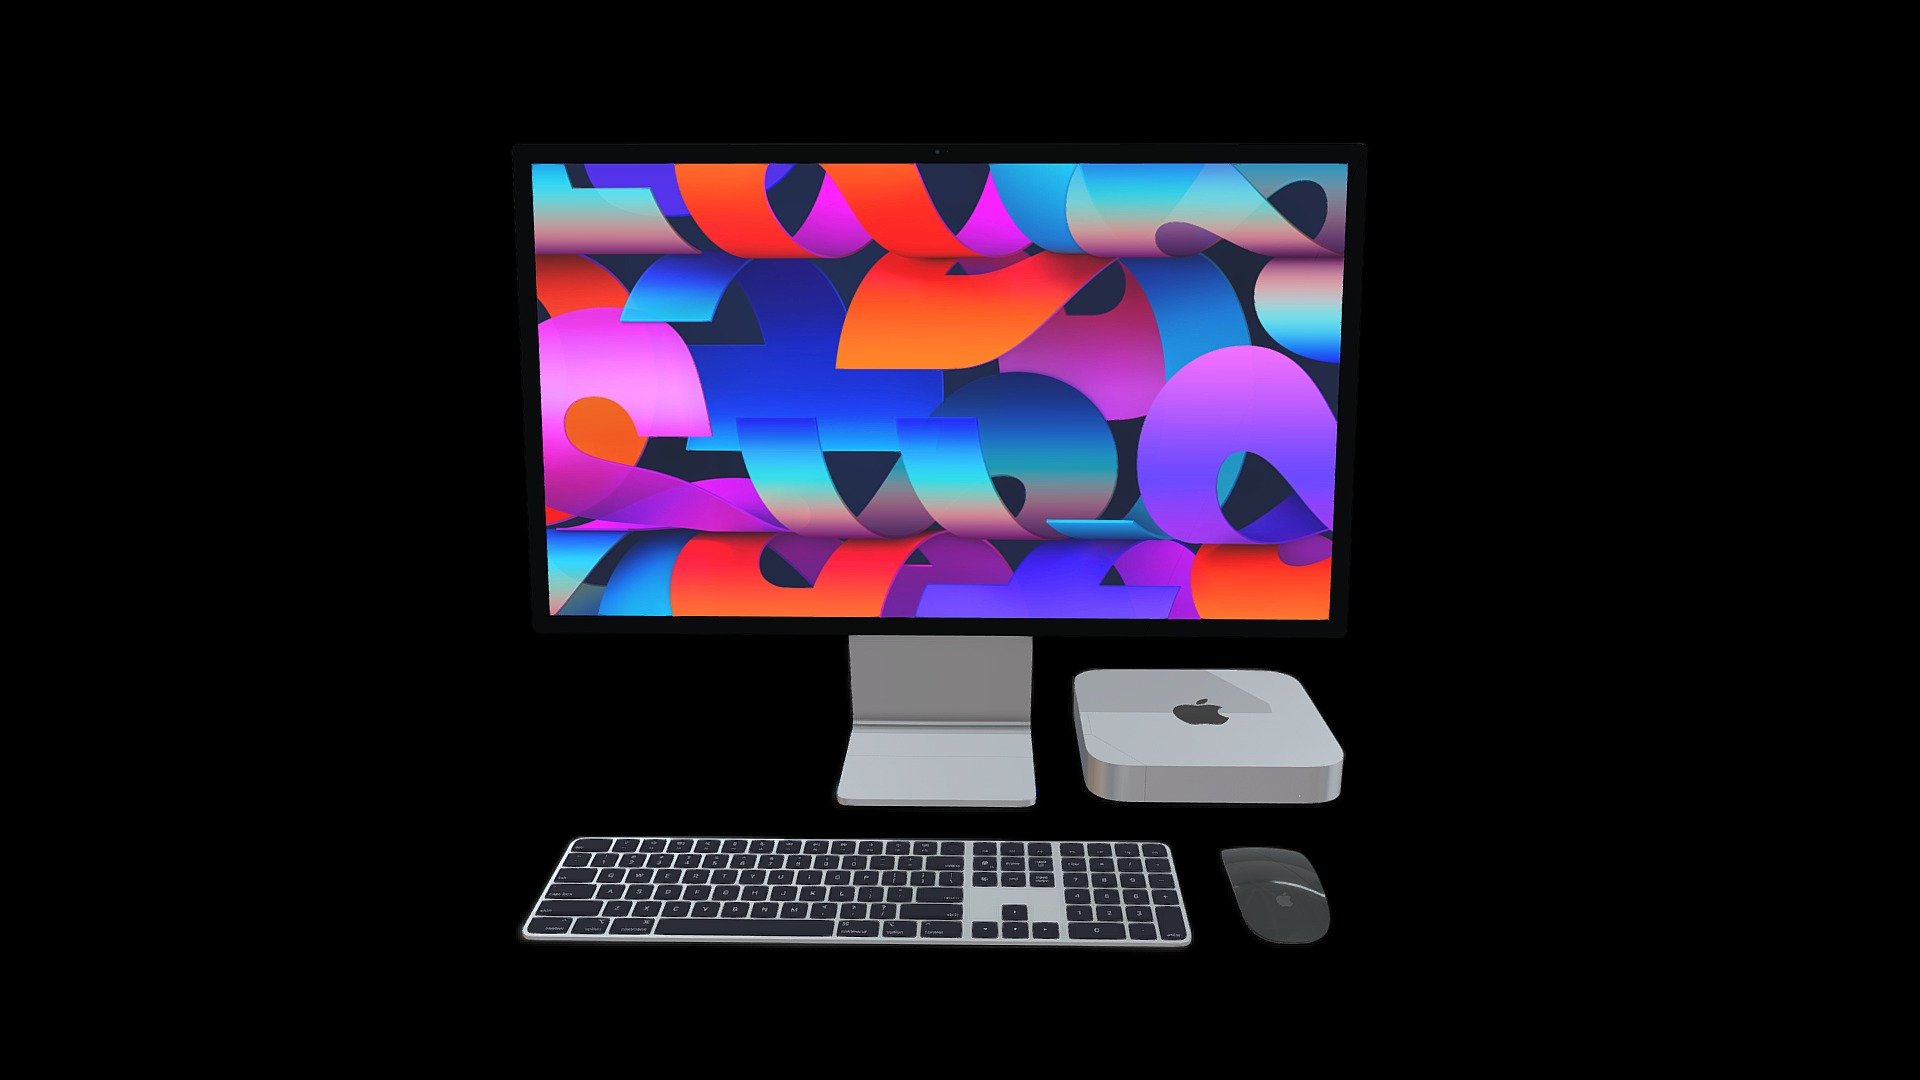 Free Mac Studio Display with Mac Mini, Keyboard and Mouse

Designed and created by Apple Inc.

Source: Apple.com

NON COMMERCIAL LICENCE - FREE Mac Studio Display - Ultra High Quality - Download Free 3D model by Navarion 3d model